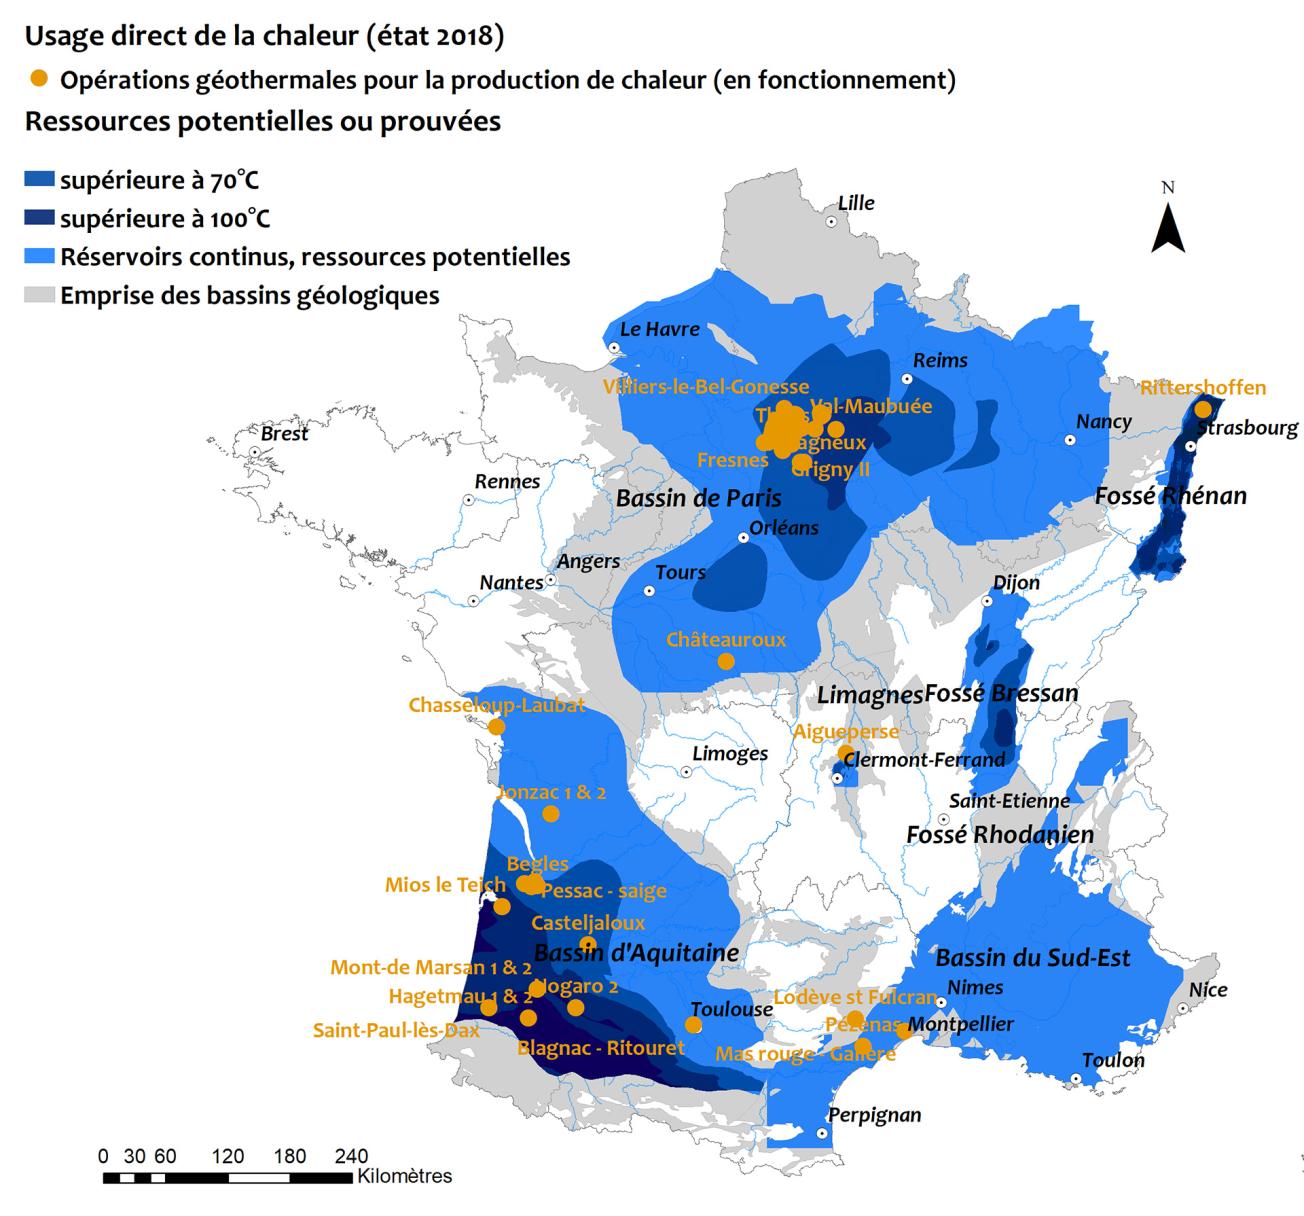 Mapping deep low-enthalpy geothermal operations in metropolitan France